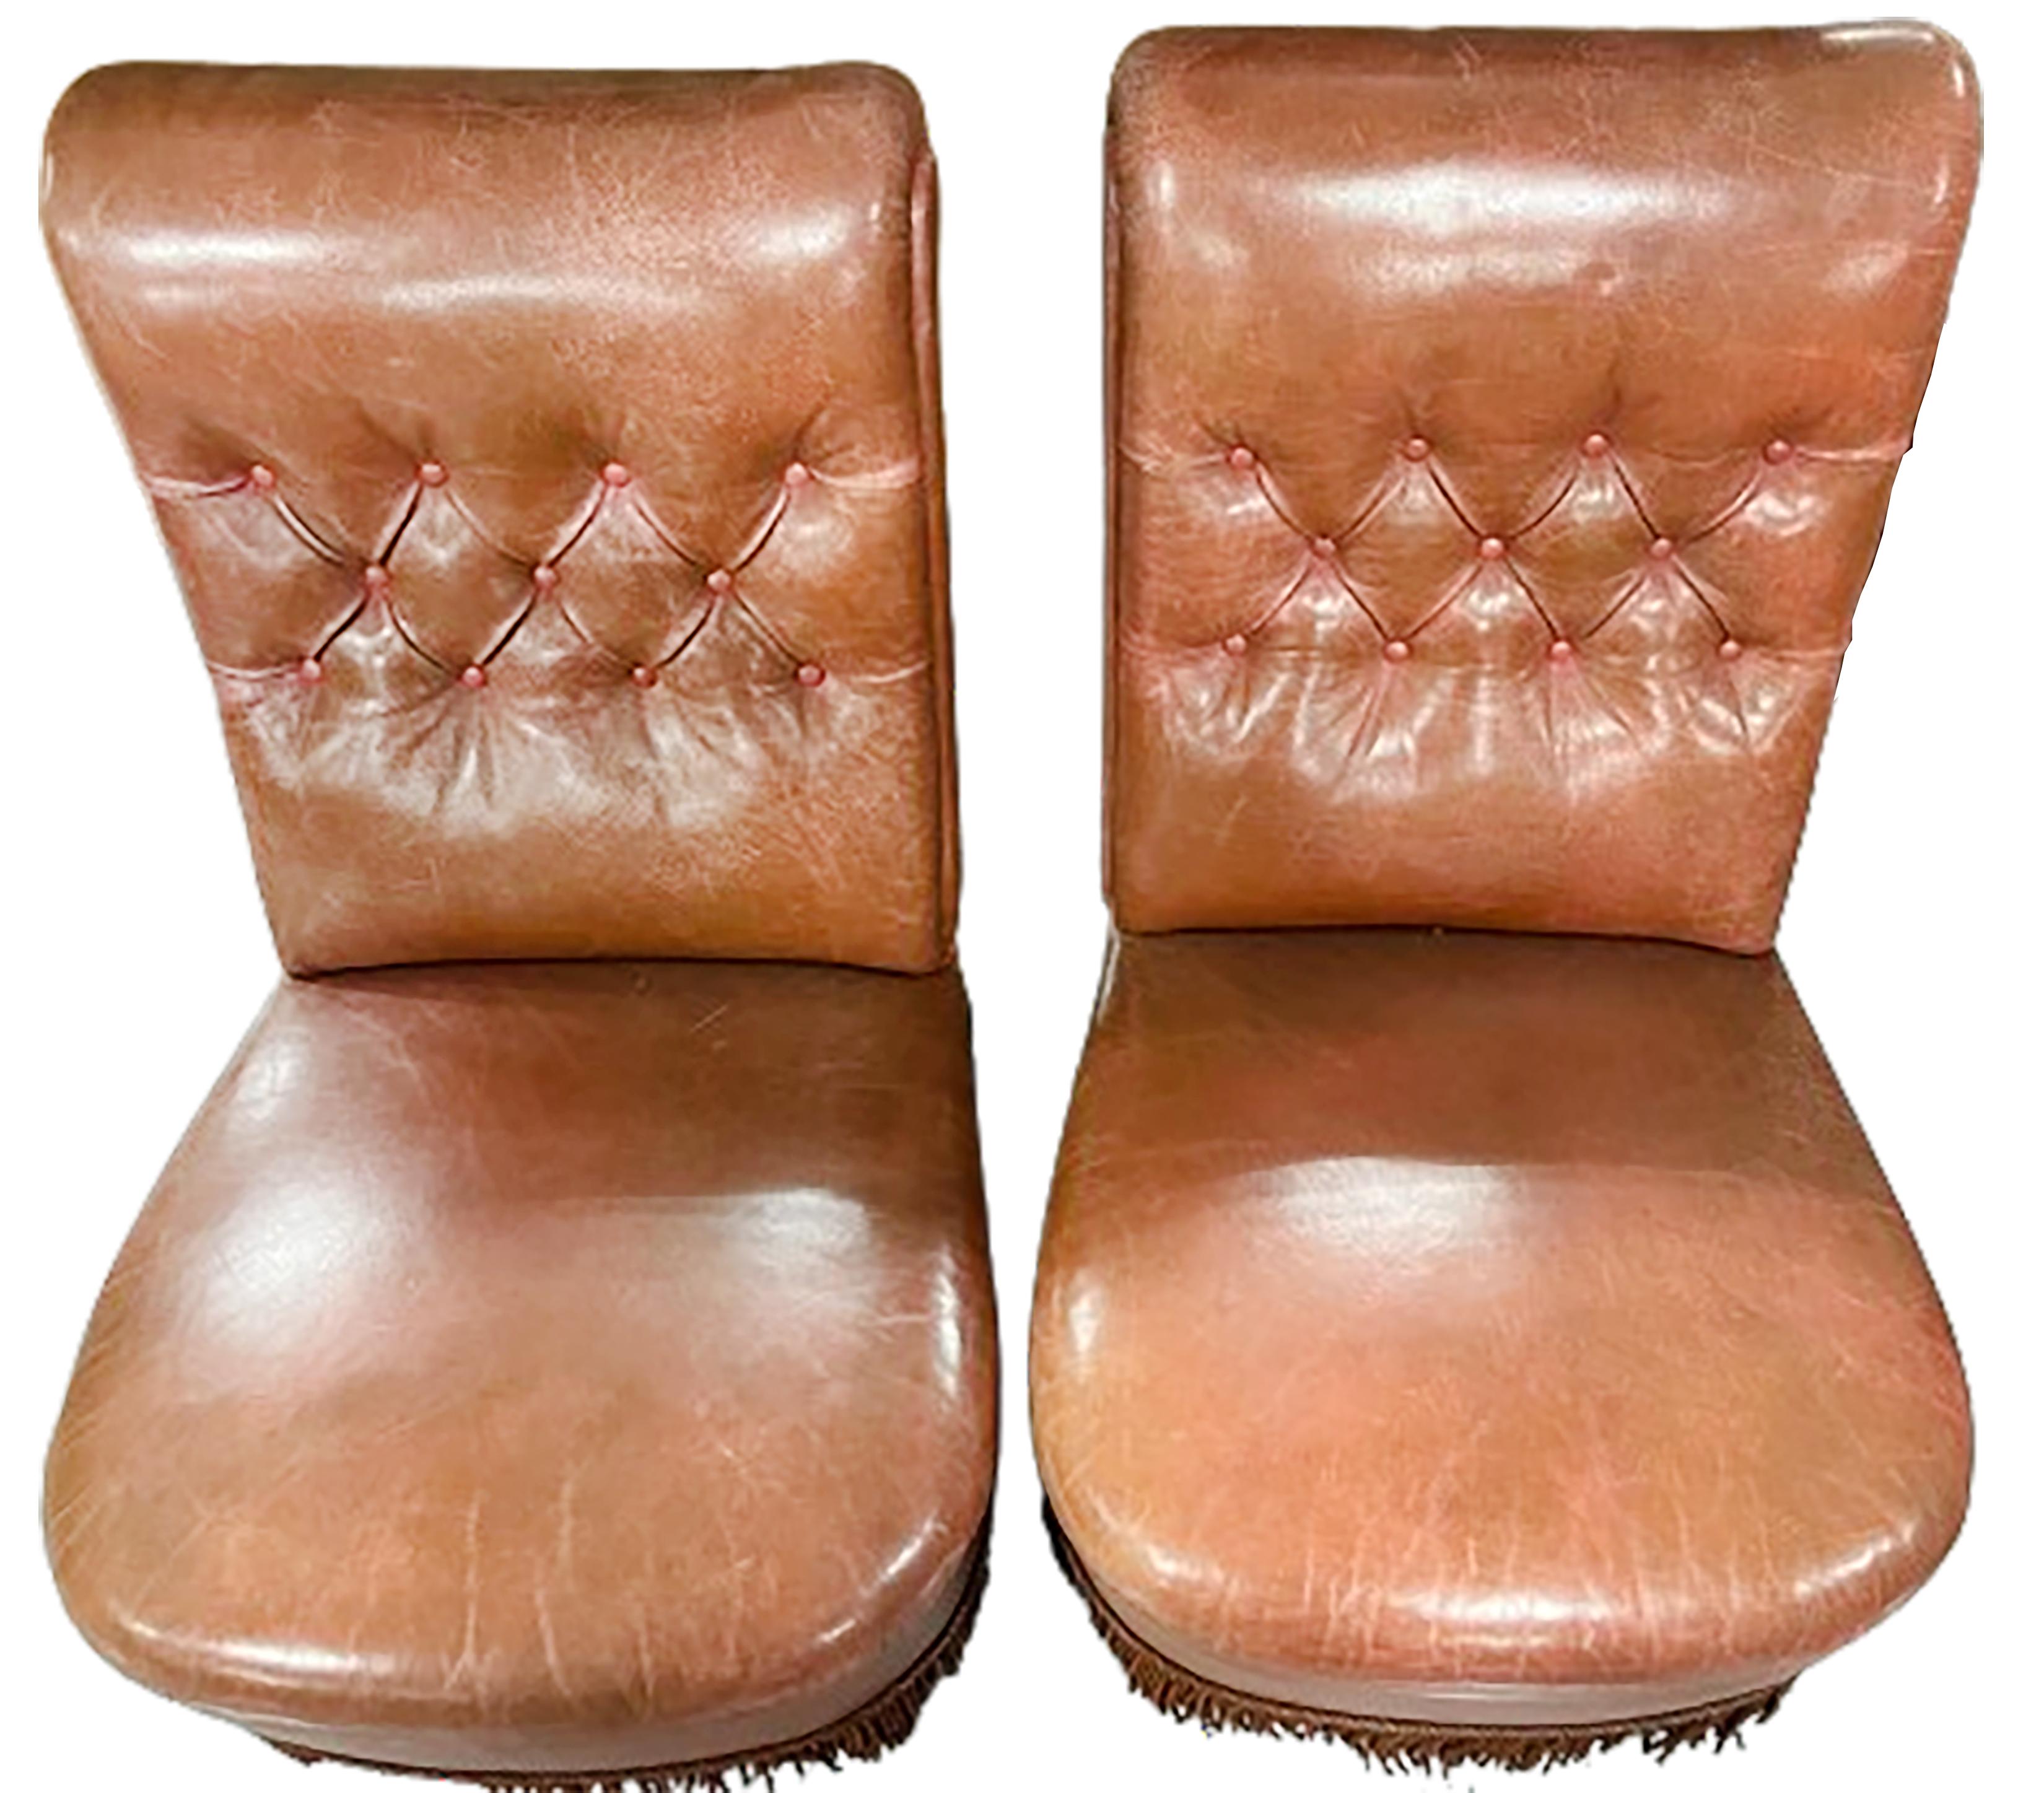 A handsome pair of tufted leather upholstered with tasseled apron side chairs. Rich red sienna patina.

No obvious markings on the bottom of the base or piece. 

In good condition. Gentle wear consistent with age and use.

This set would make a